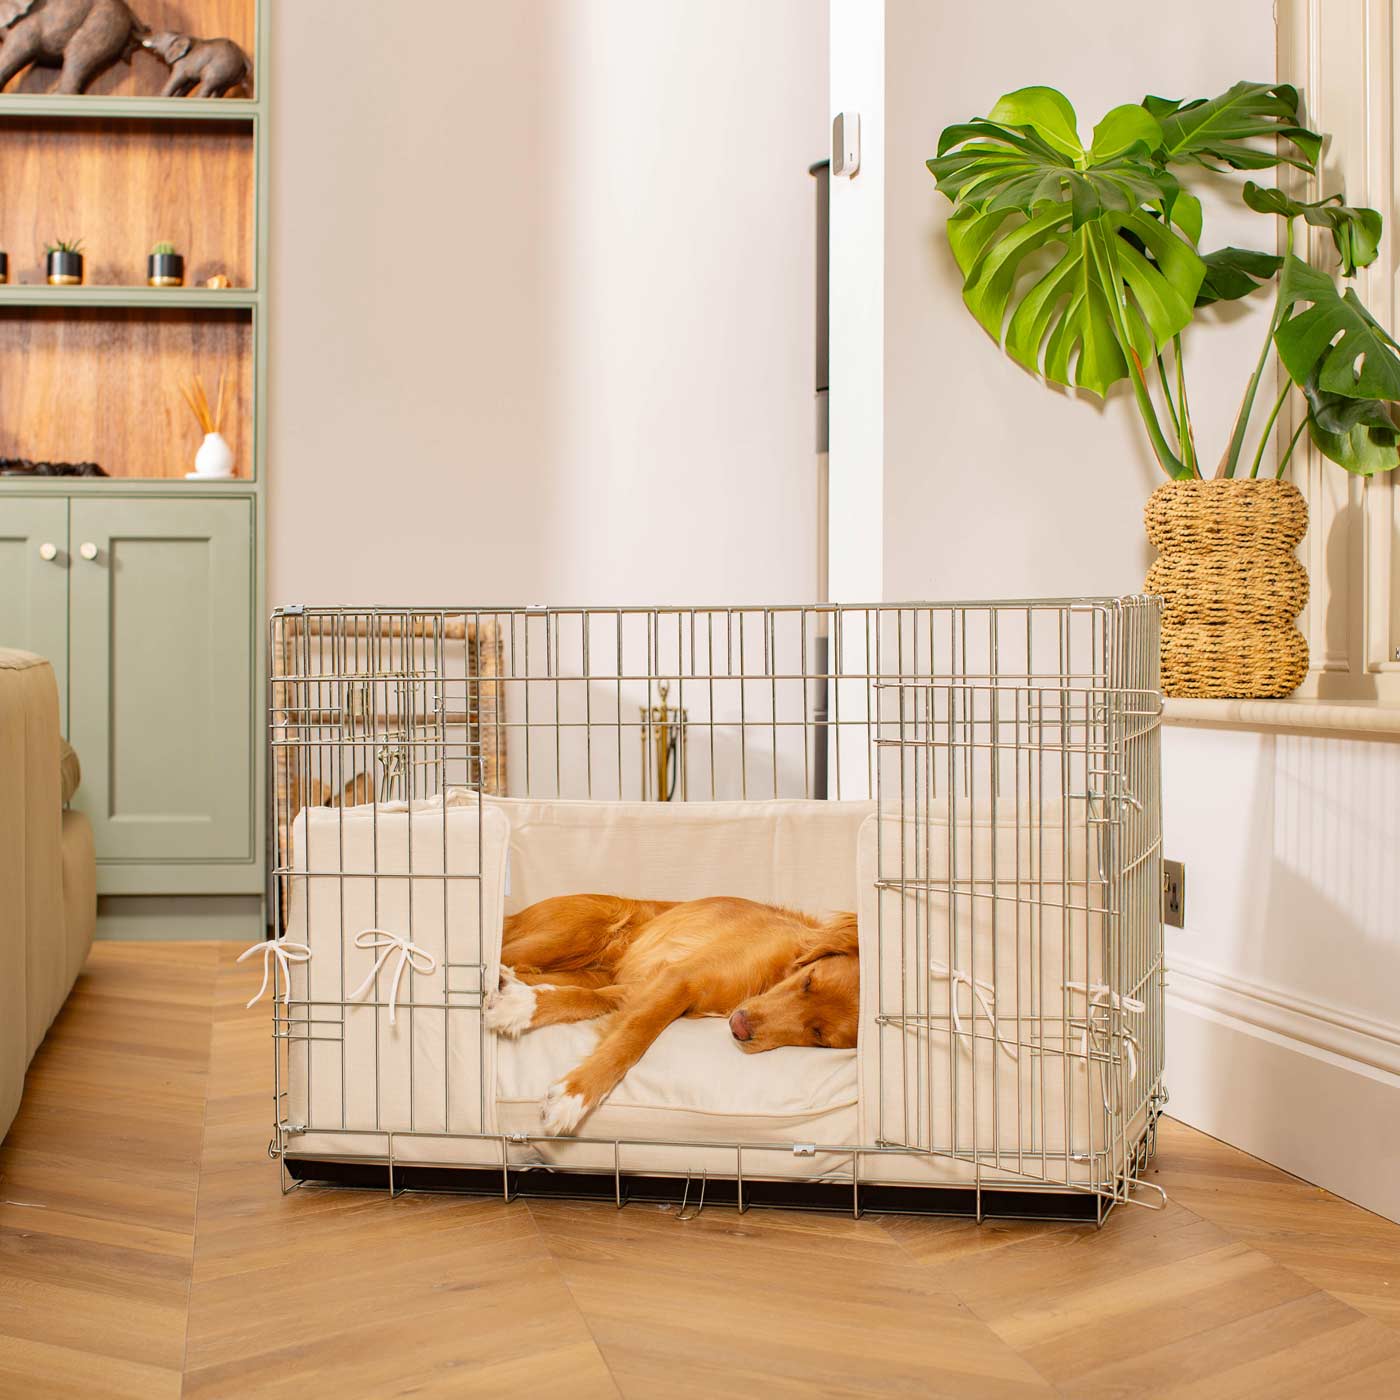 [colour:savanna Bone] Accessorise your dog crate with our stunning bumper covers, choose from our Savanna collection! Made using luxury fabric for the perfect crate accessory to build the ultimate dog den! Available now in 3 colours and sizes at Lords & Labradors